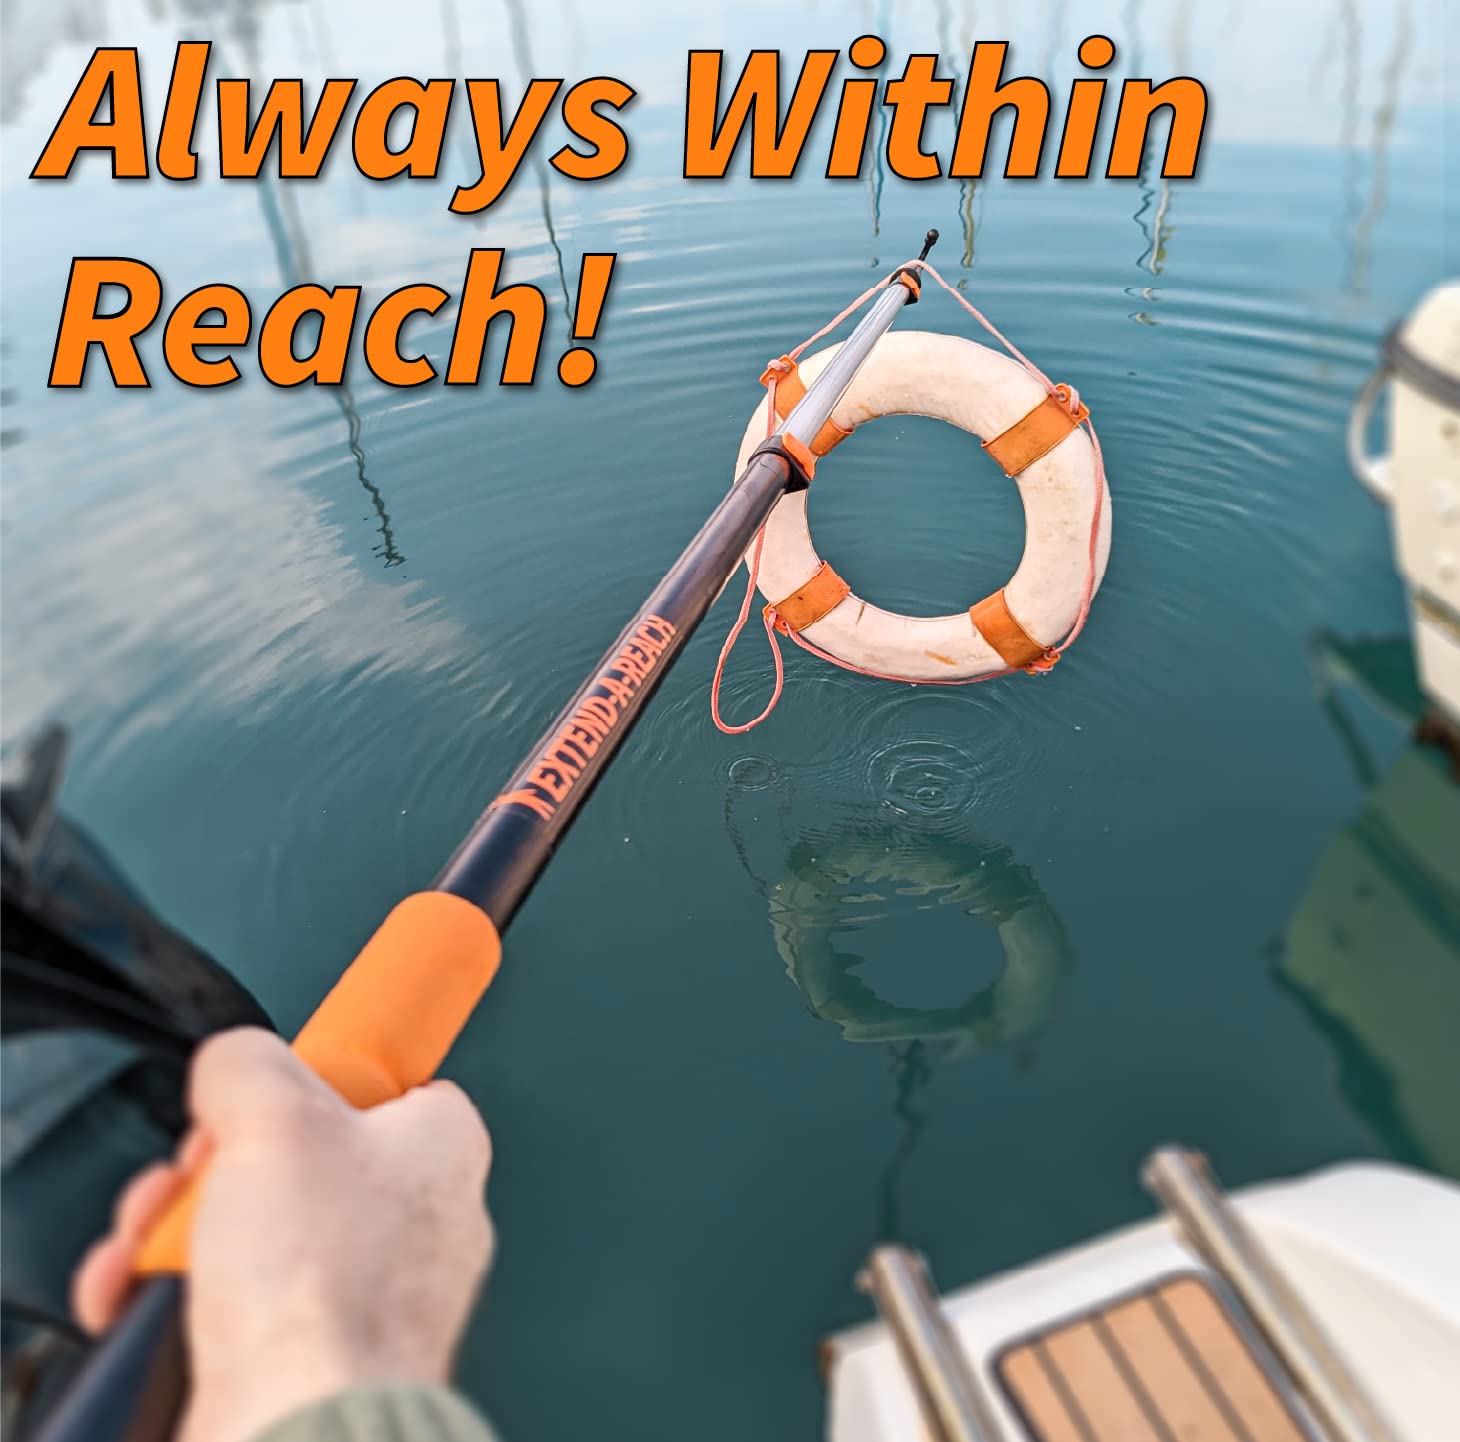 Boat Hook for Docking with Telescoping Extension Pole // Durable, Floating, Lightweight and Sturdy Telescoping Boat Hook Pole // the Ultimate Boat Pole for Docking, Push-Pull and Boating